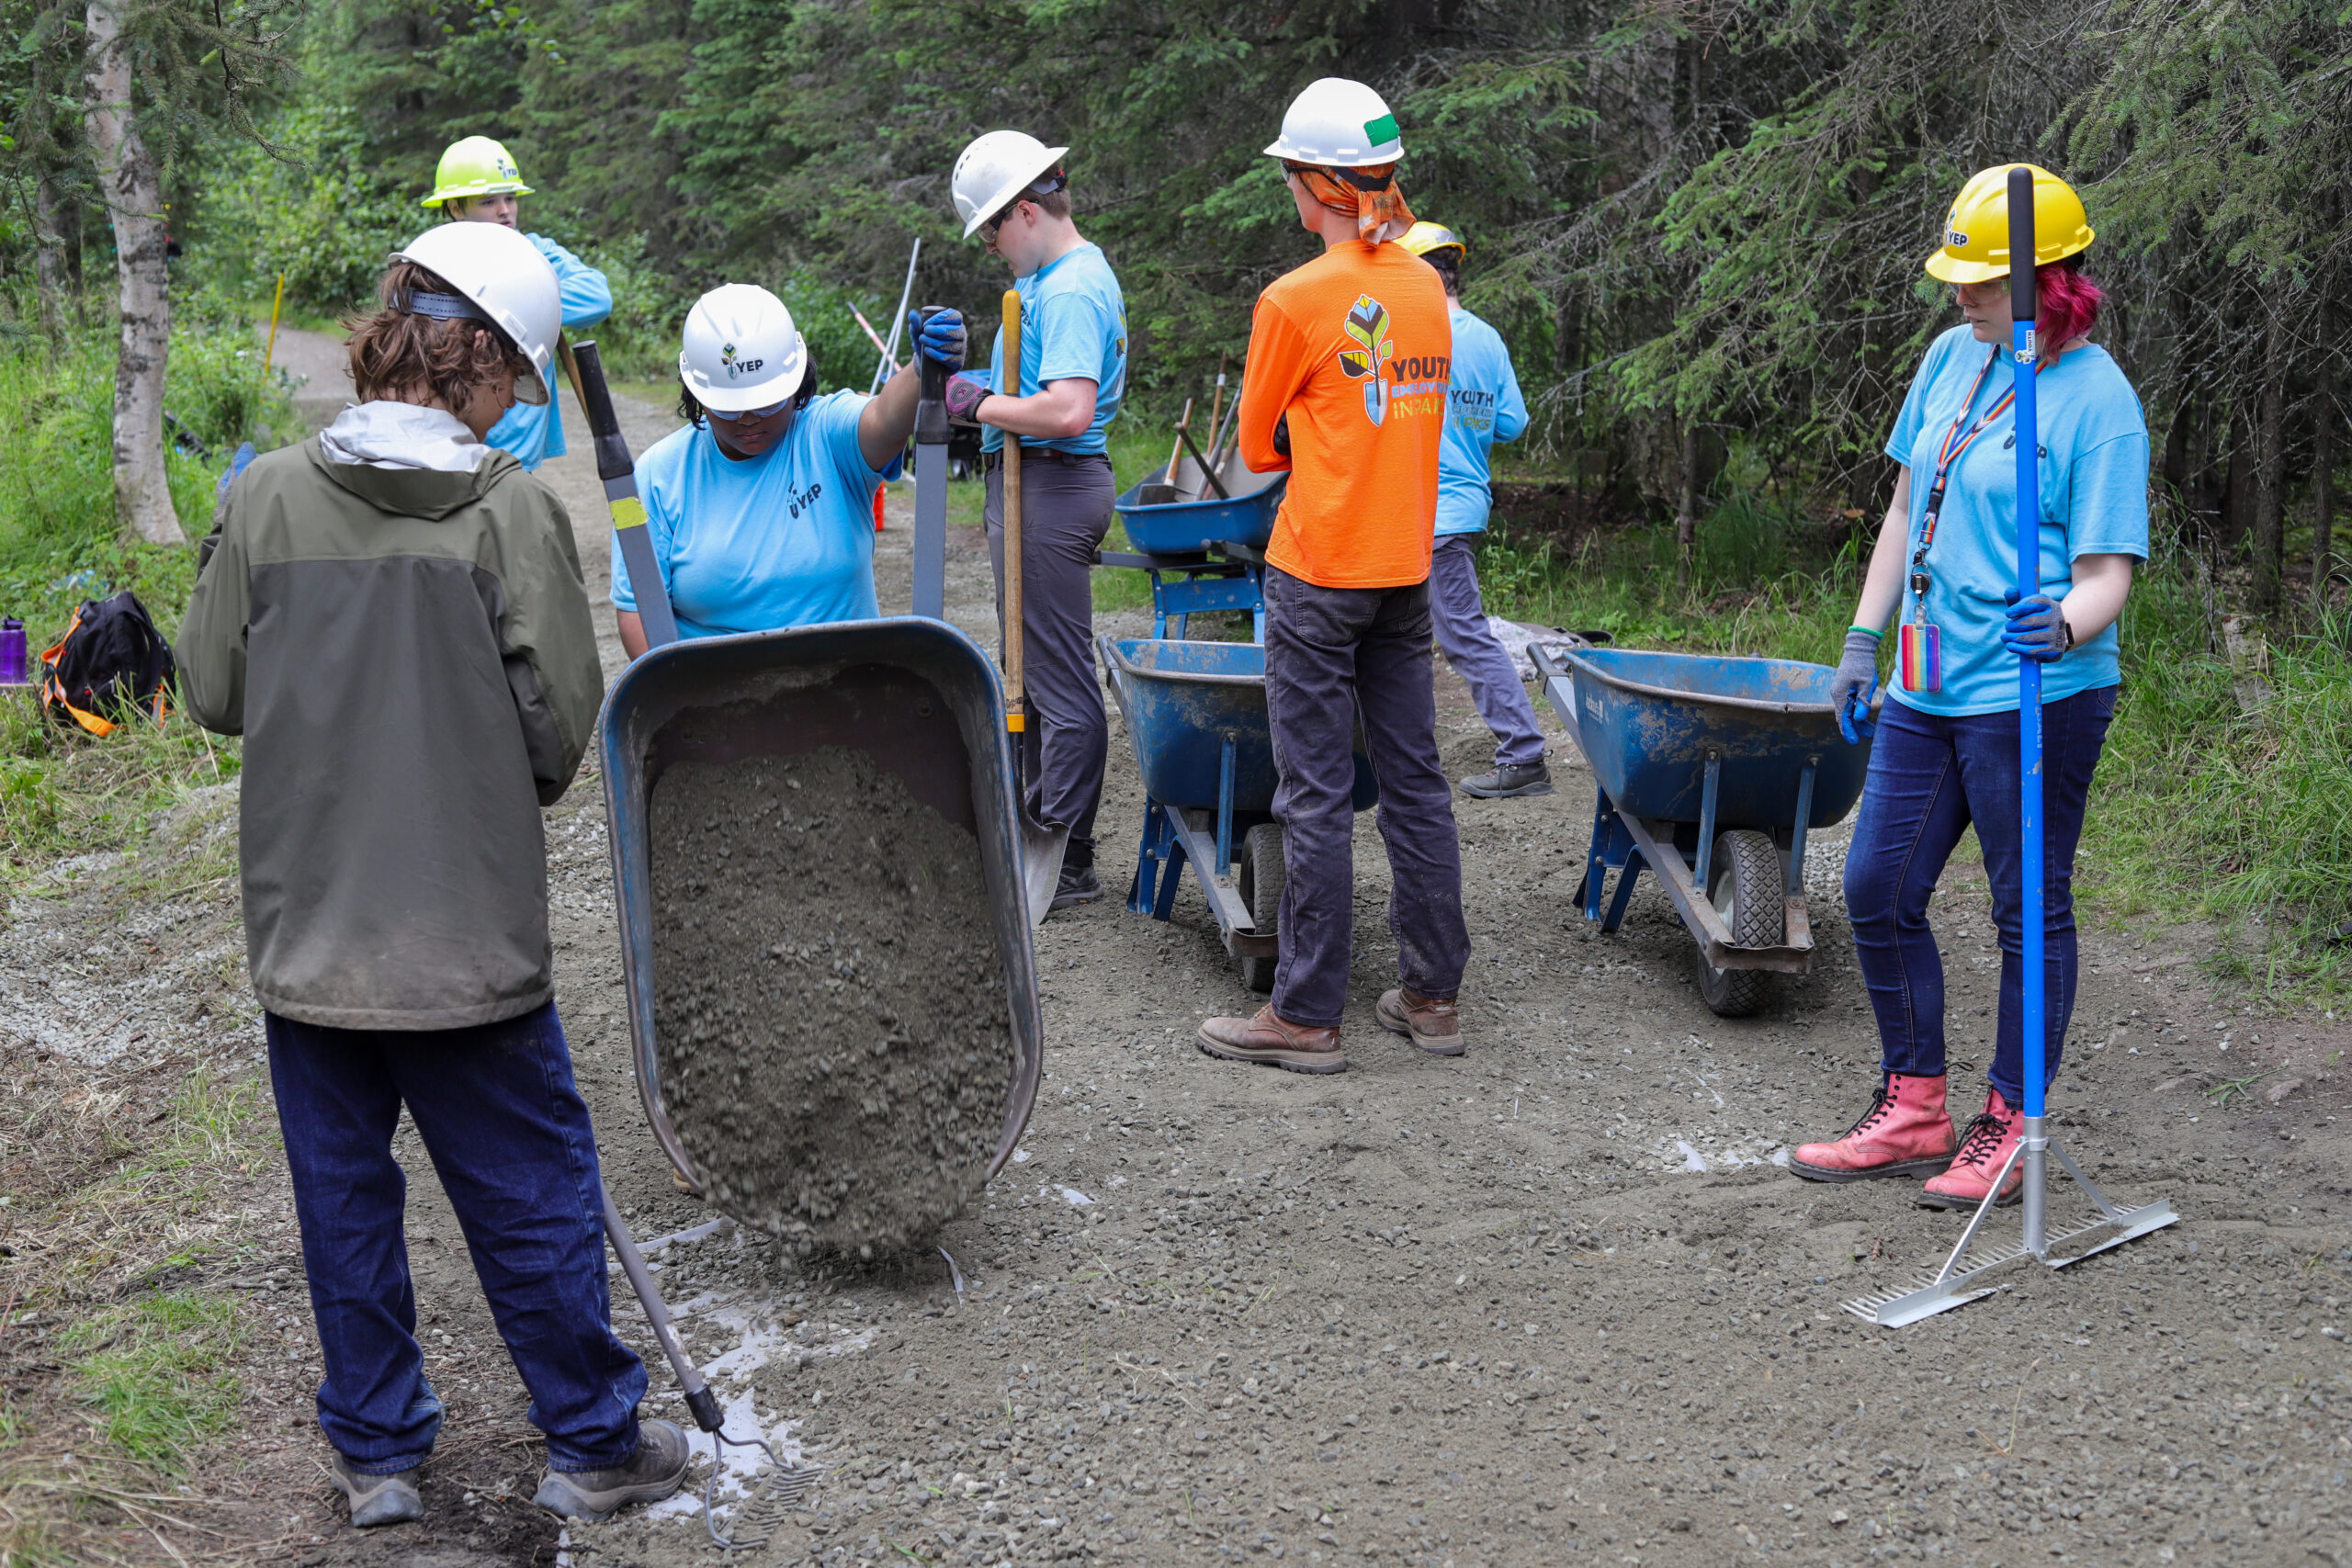 A person in a hard hat dumps a wheelbarrow full of gravel onto the ground. Others stand next to them with rakes.